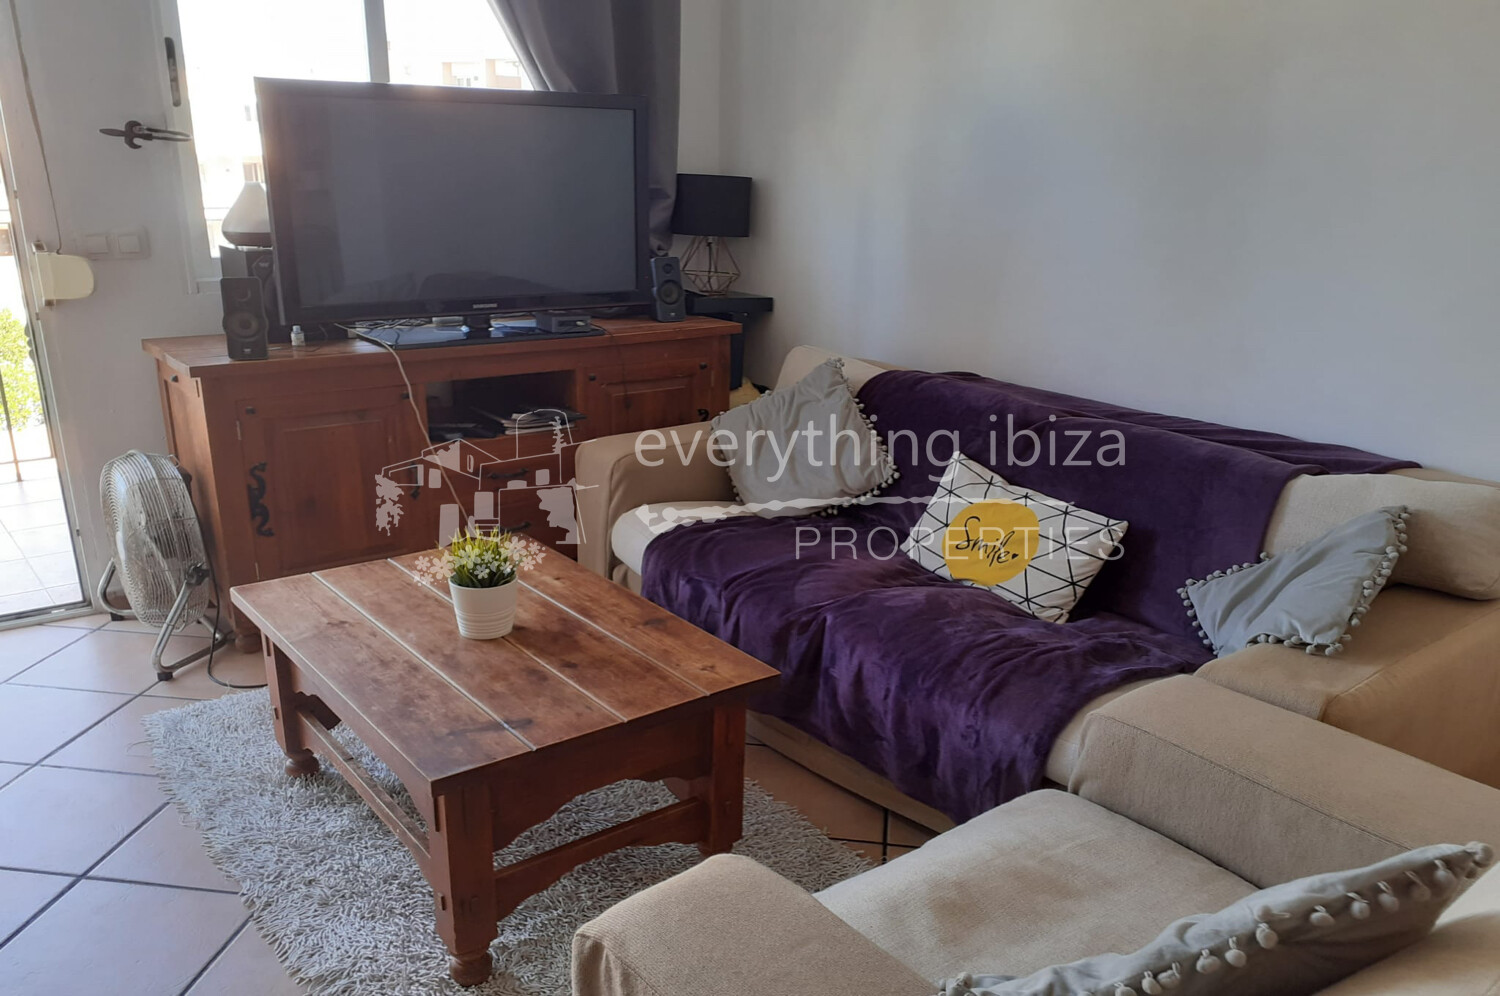 Contemporary Top Floor Apartment with Roof Terrace, ref. 1469, for sale in Ibiza by everything ibiza Properties